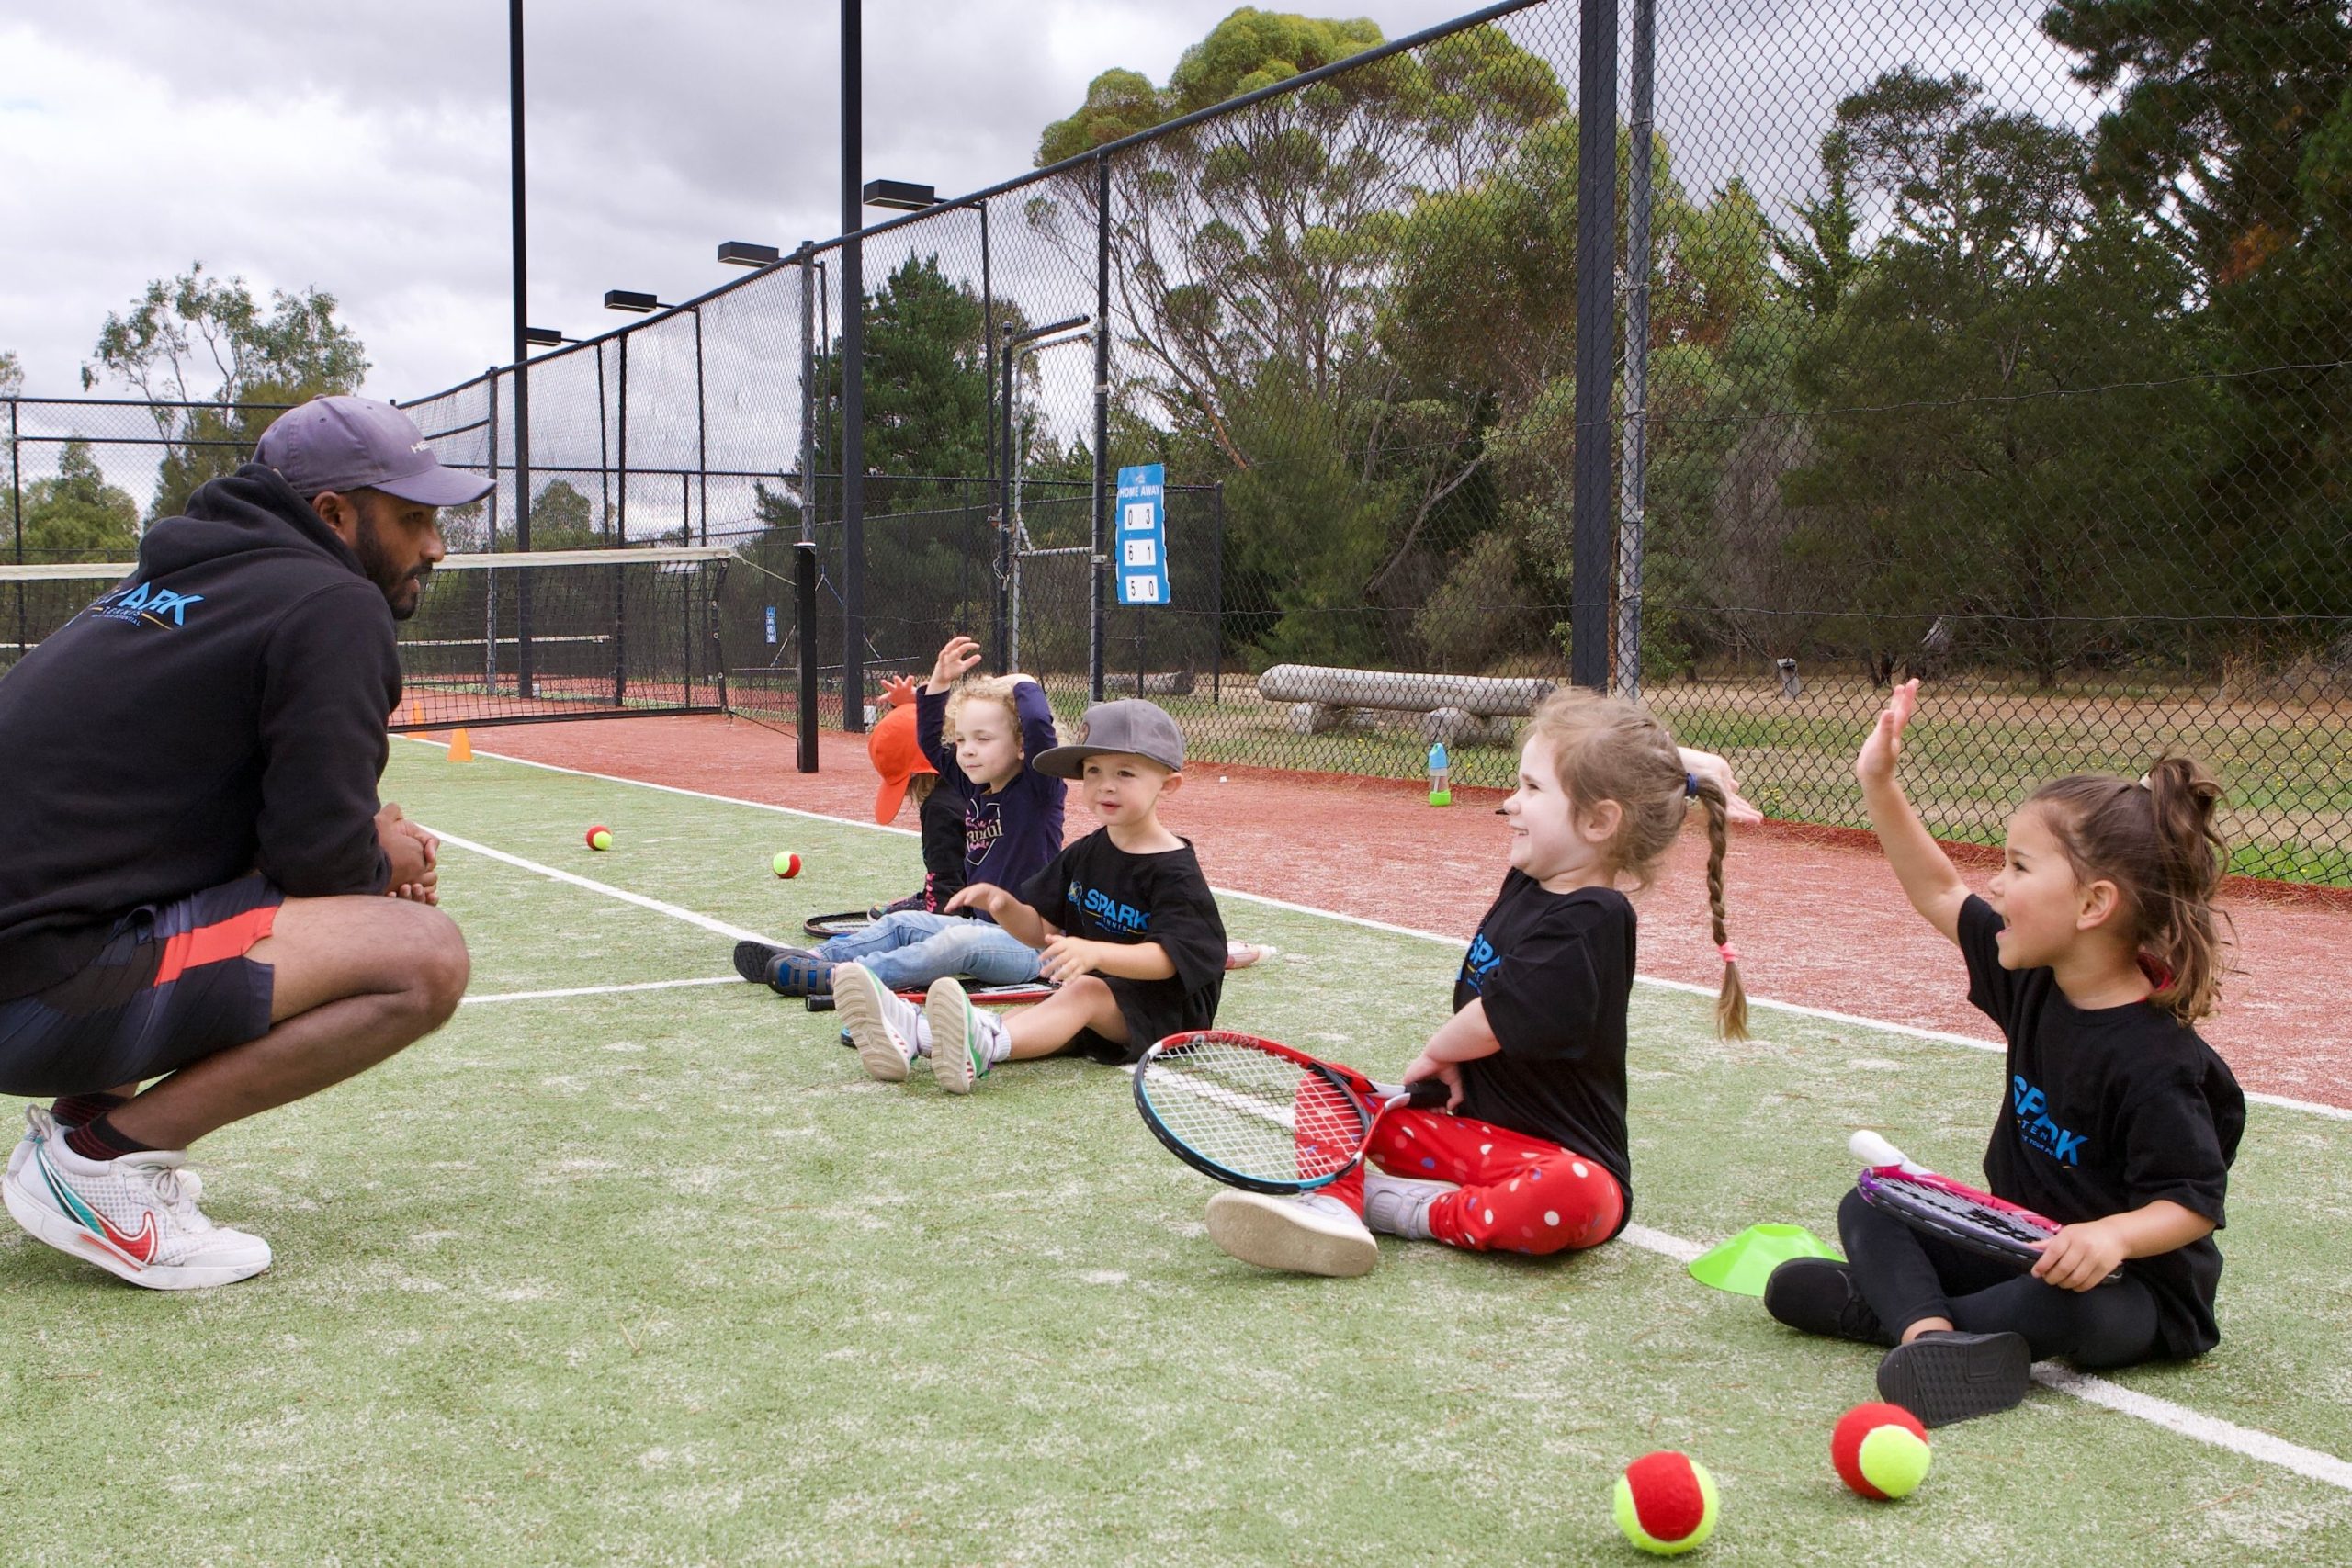 Tennis Lessons Melbourne for Kids, Teens & Adults - Spark Tennis